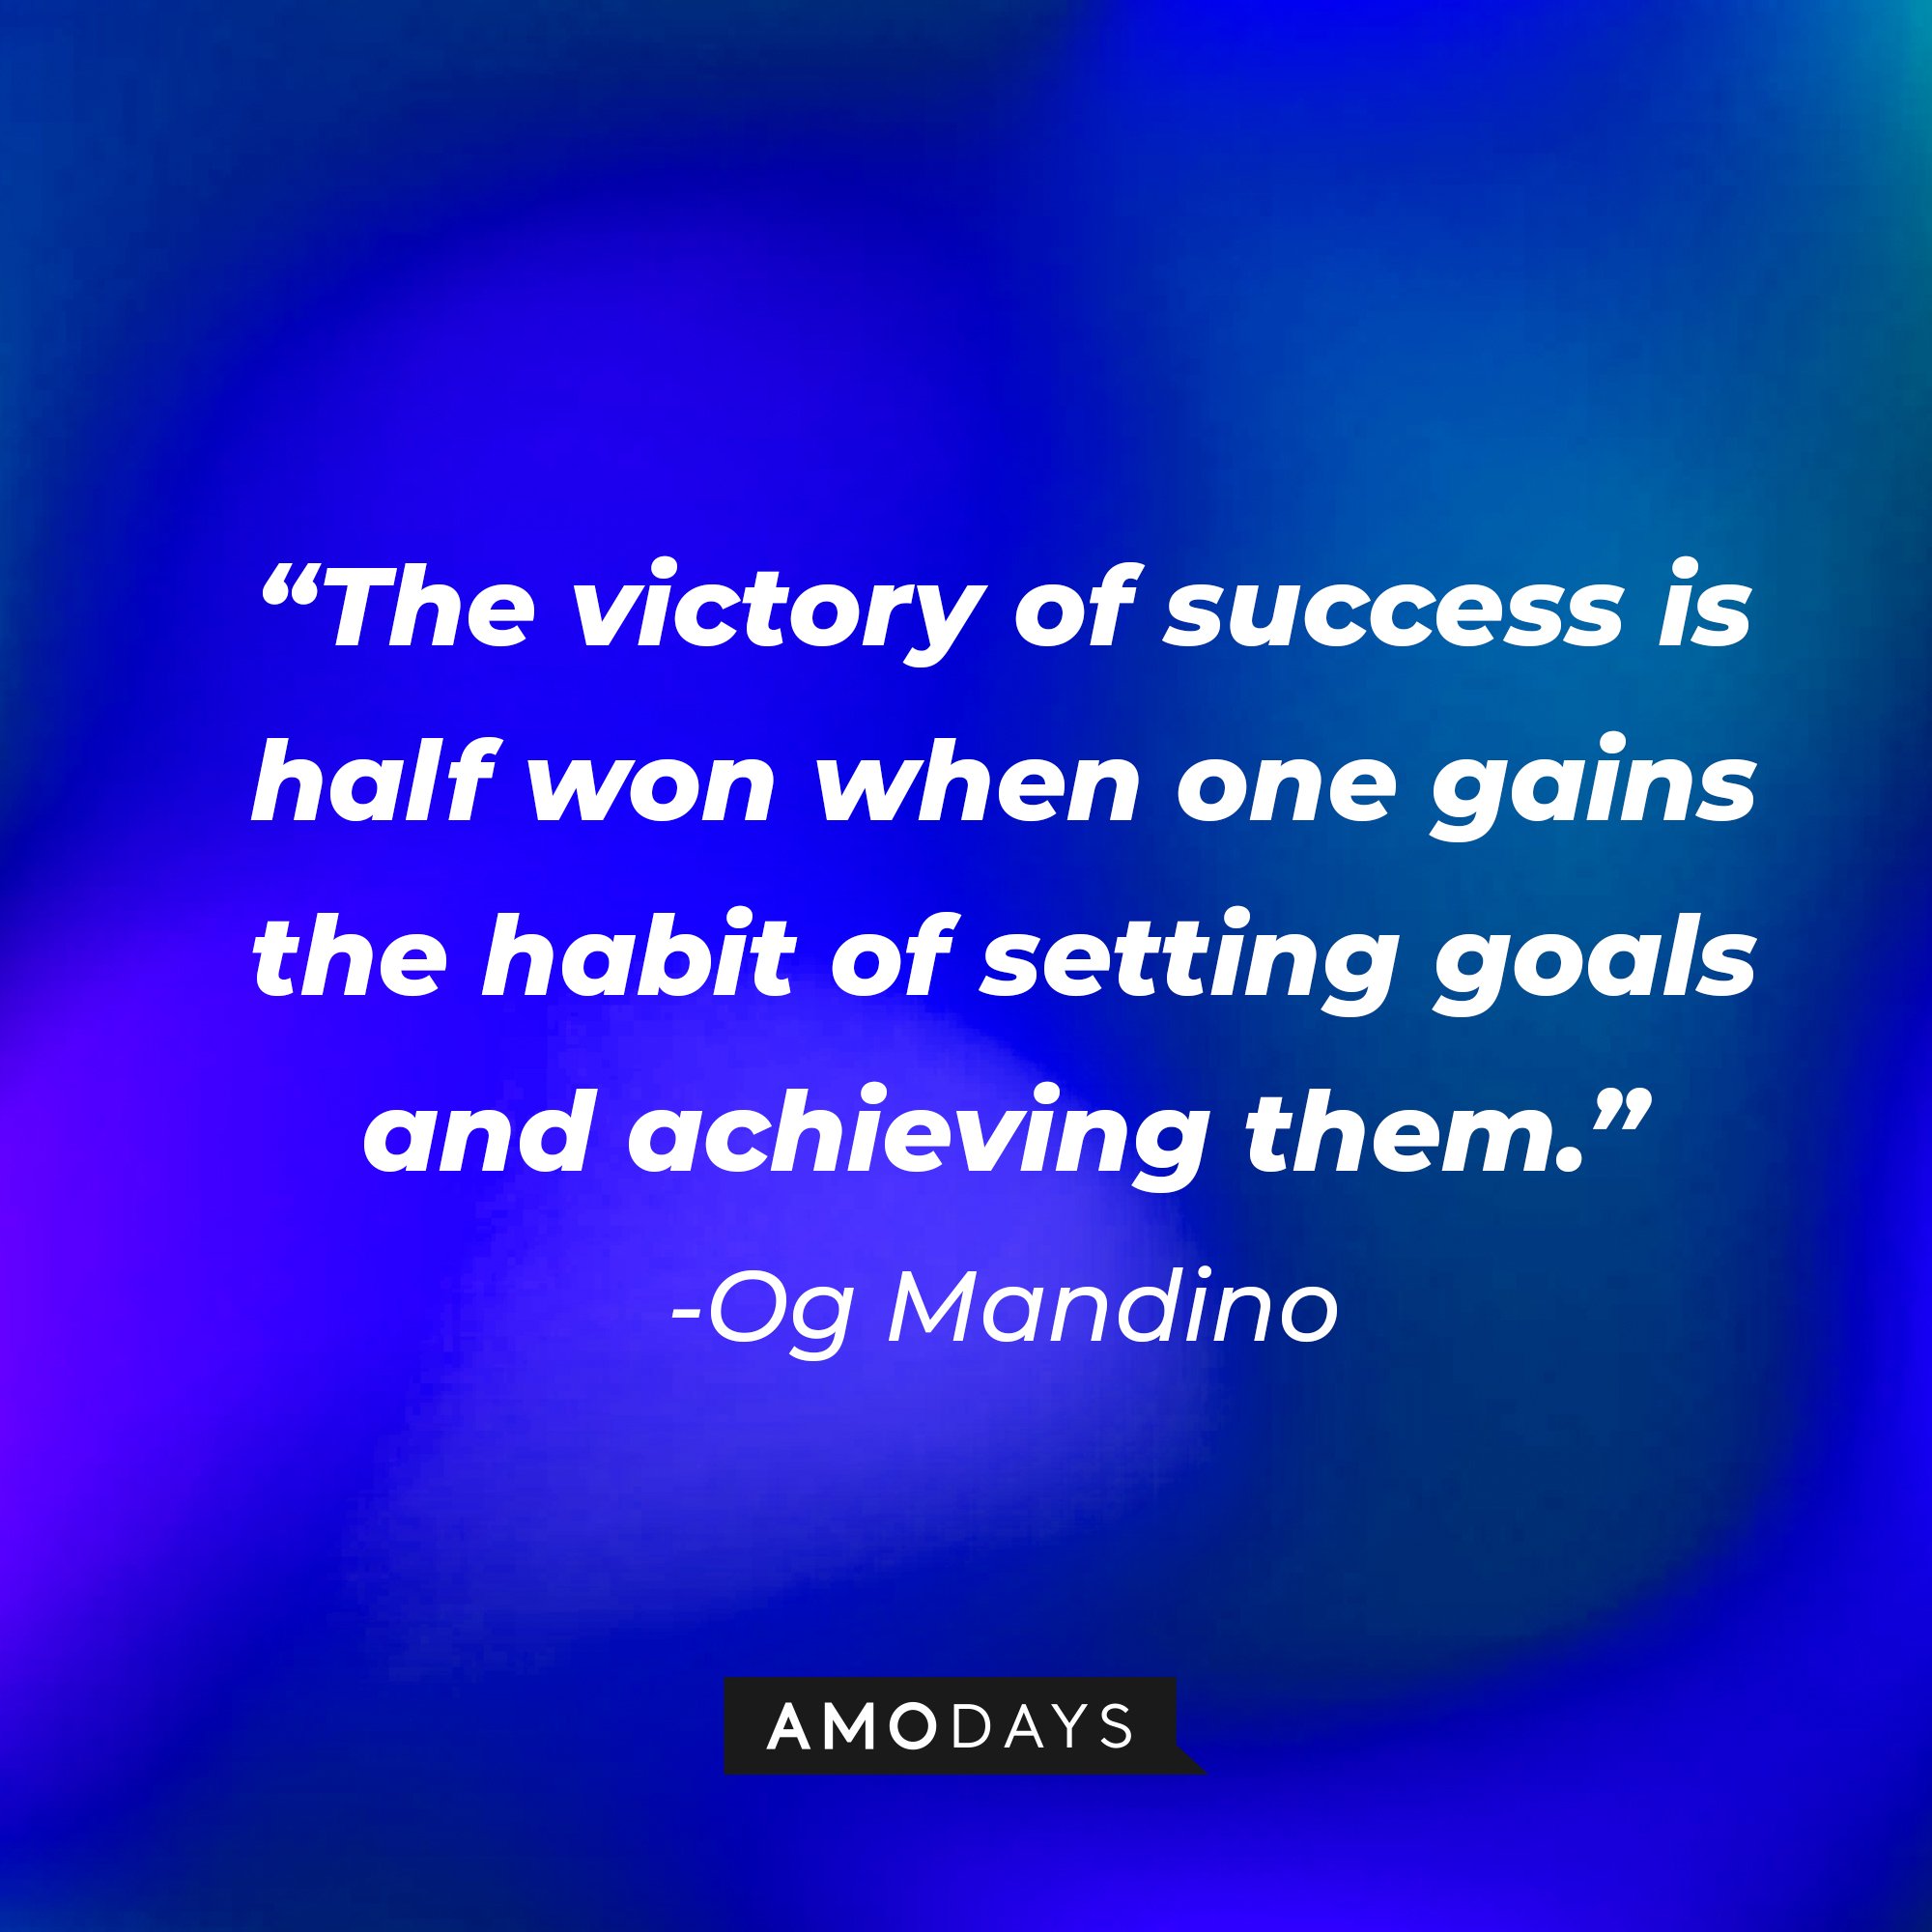 Og Mandino’s quote: "The victory of success is half won when one gains the habit of setting goals and achieving them." | Image: AmoDays